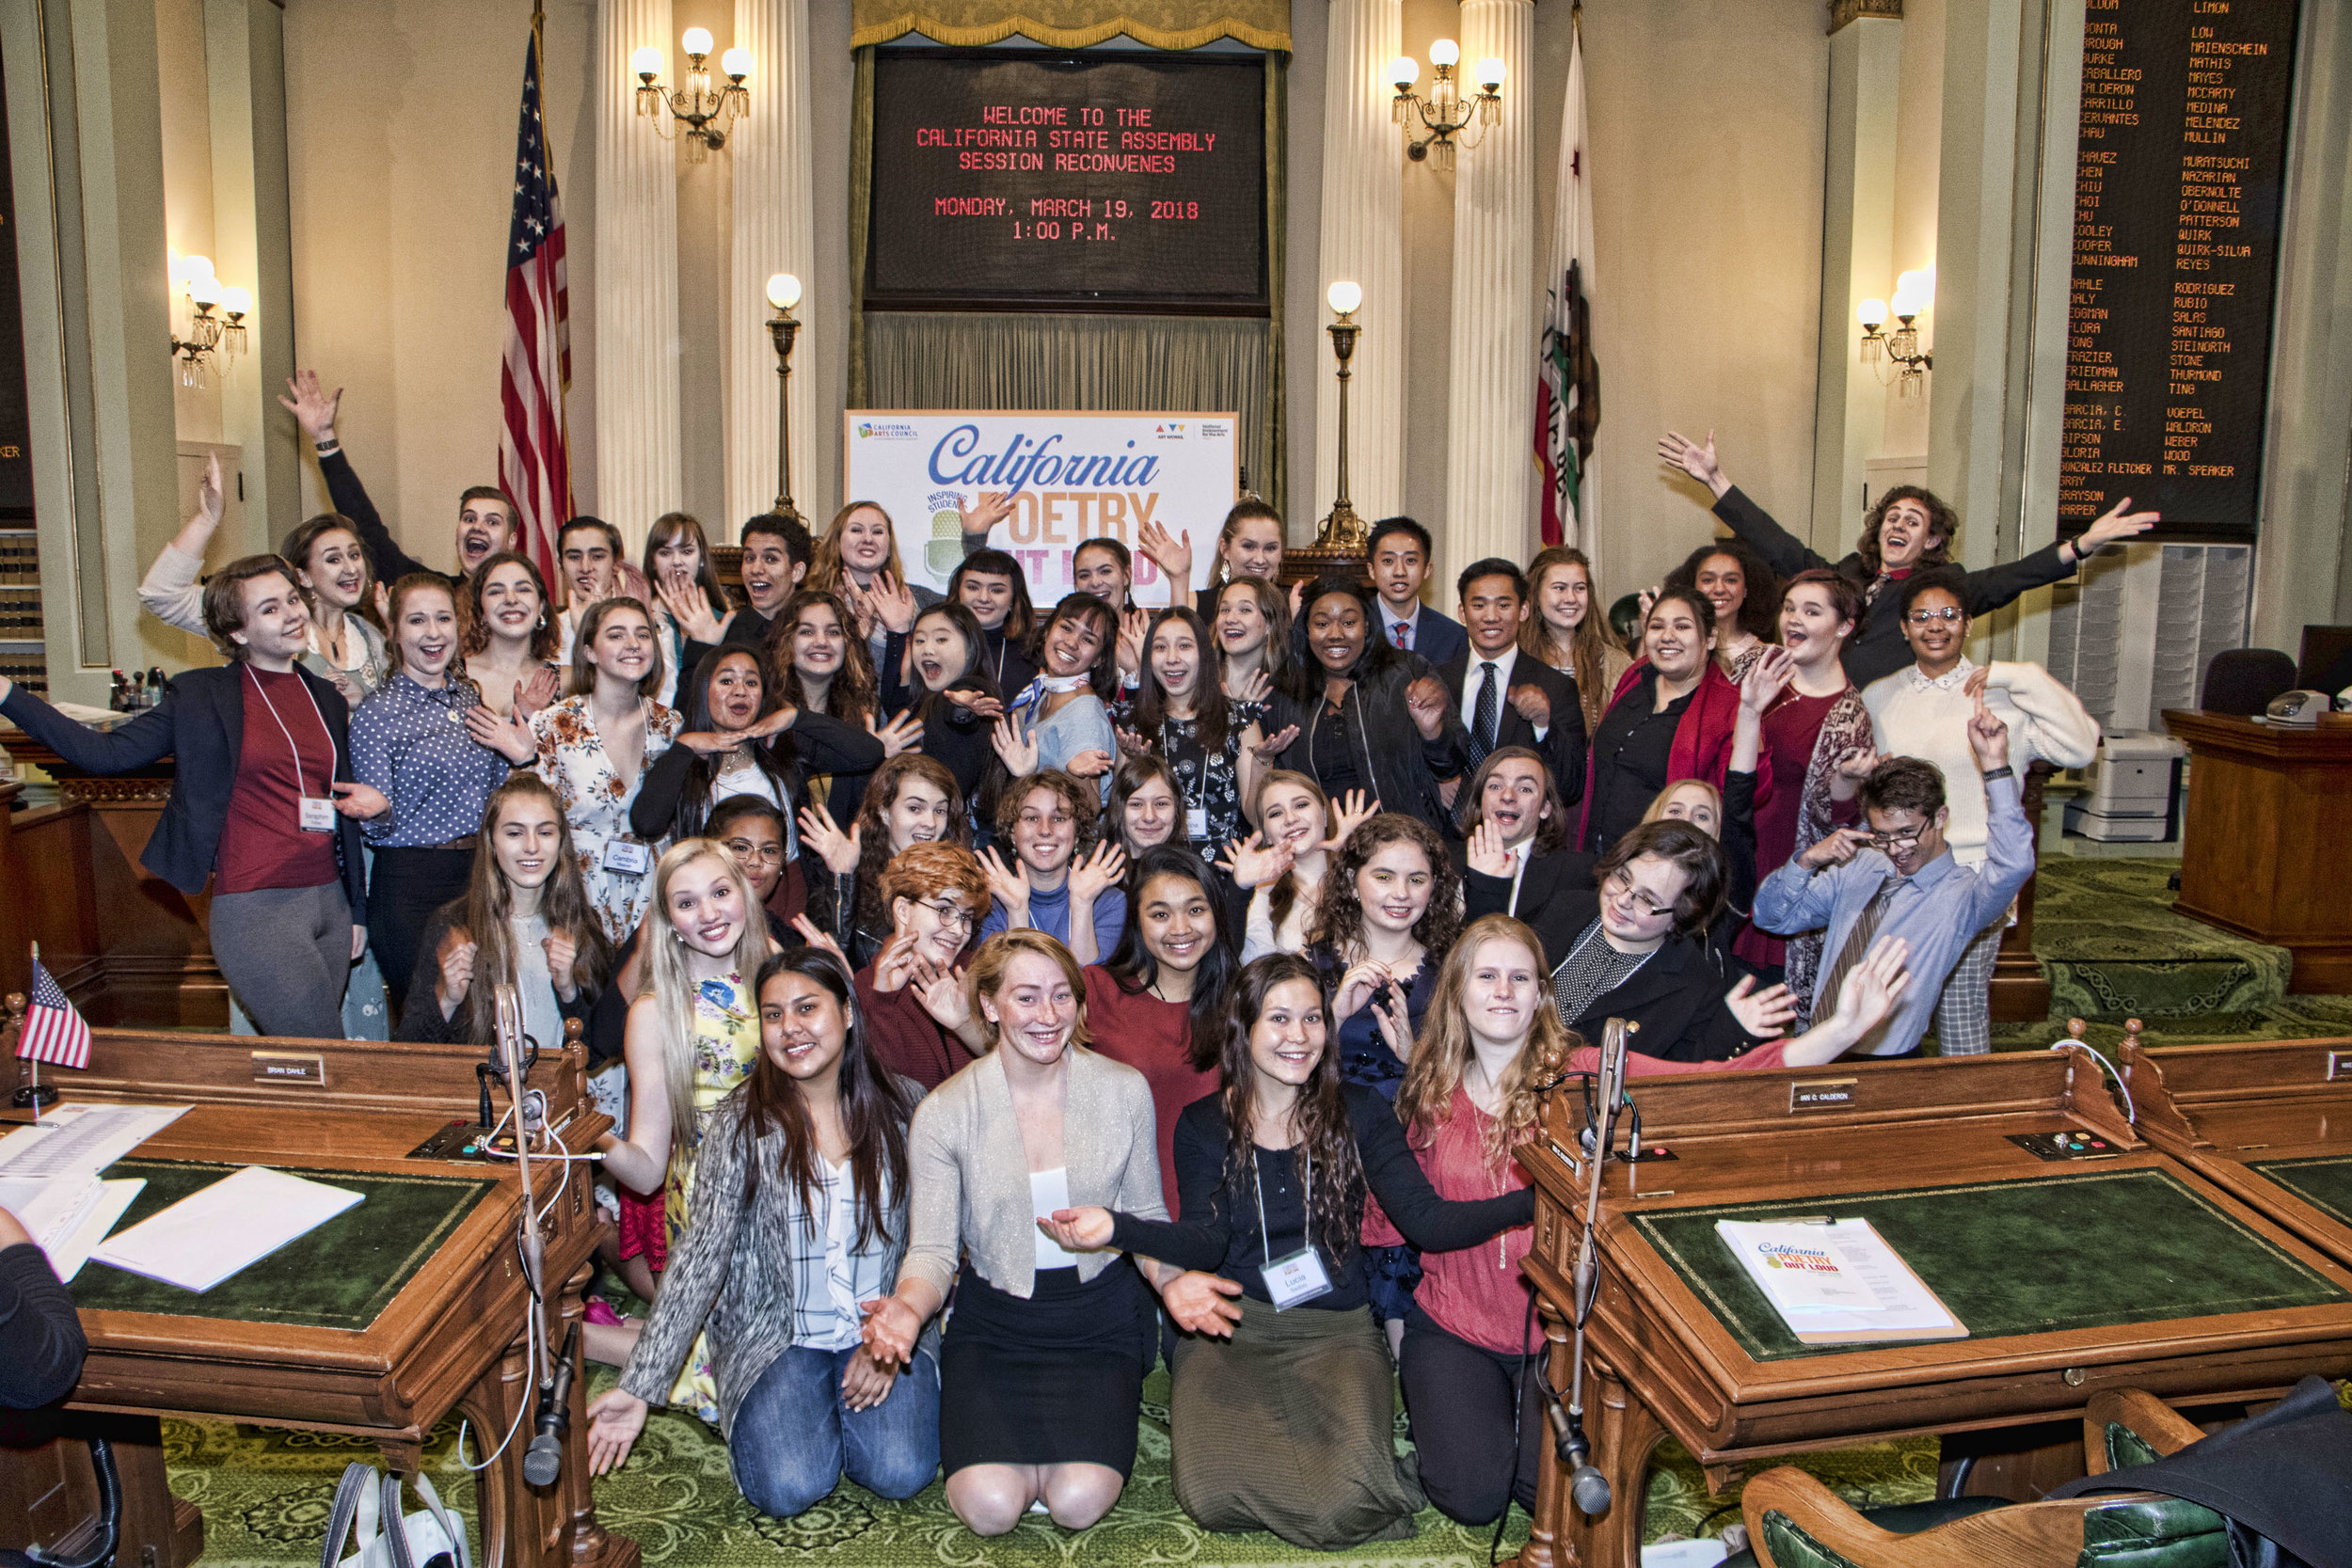 2018 California Poetry Out Loud State Finals